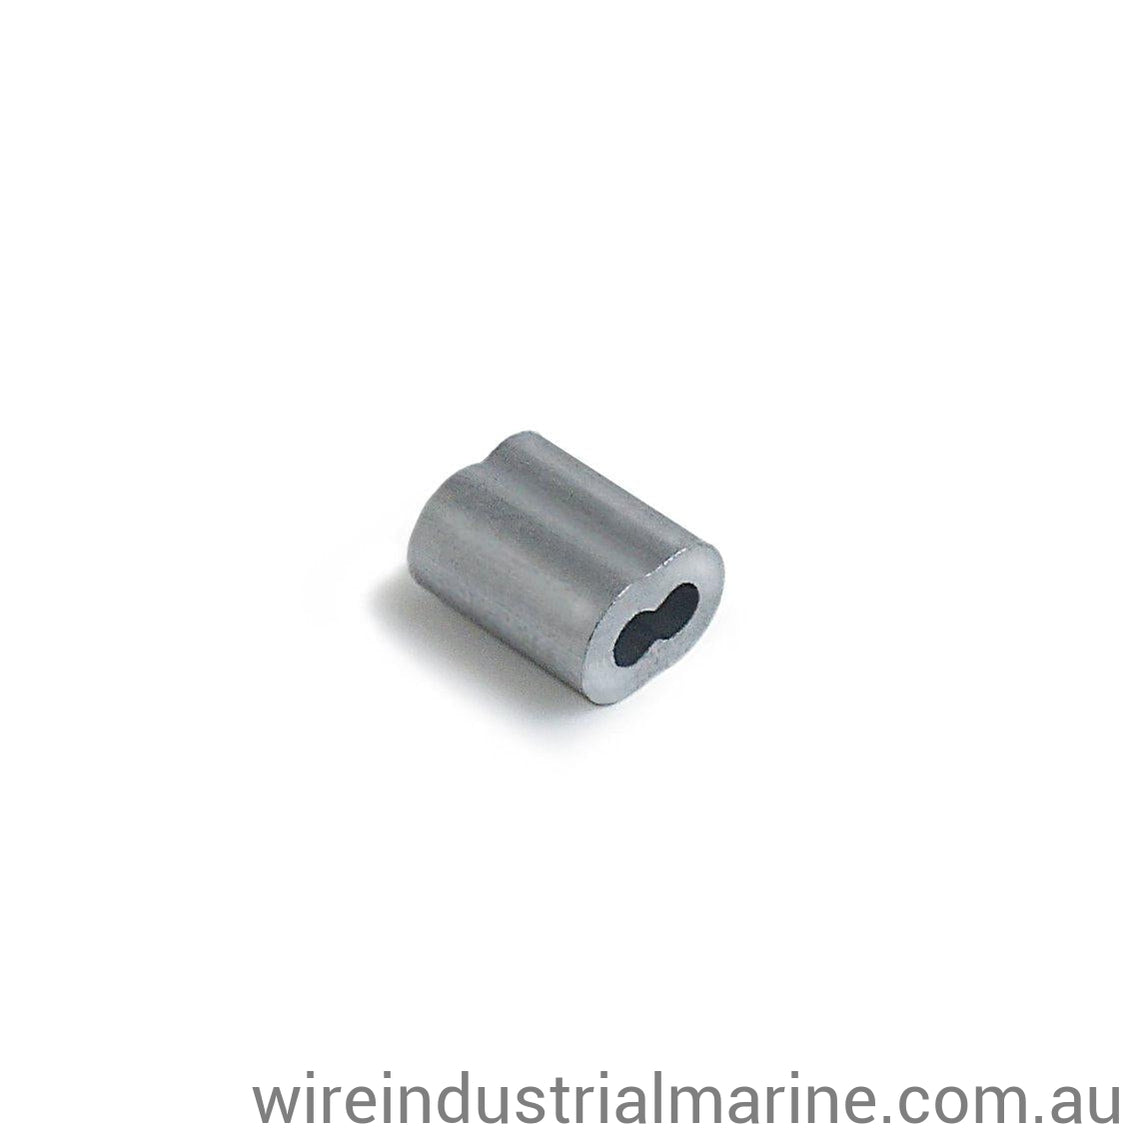 1.5mm Alloy swage for wire rope AS-1.5-wireindustrialmarine